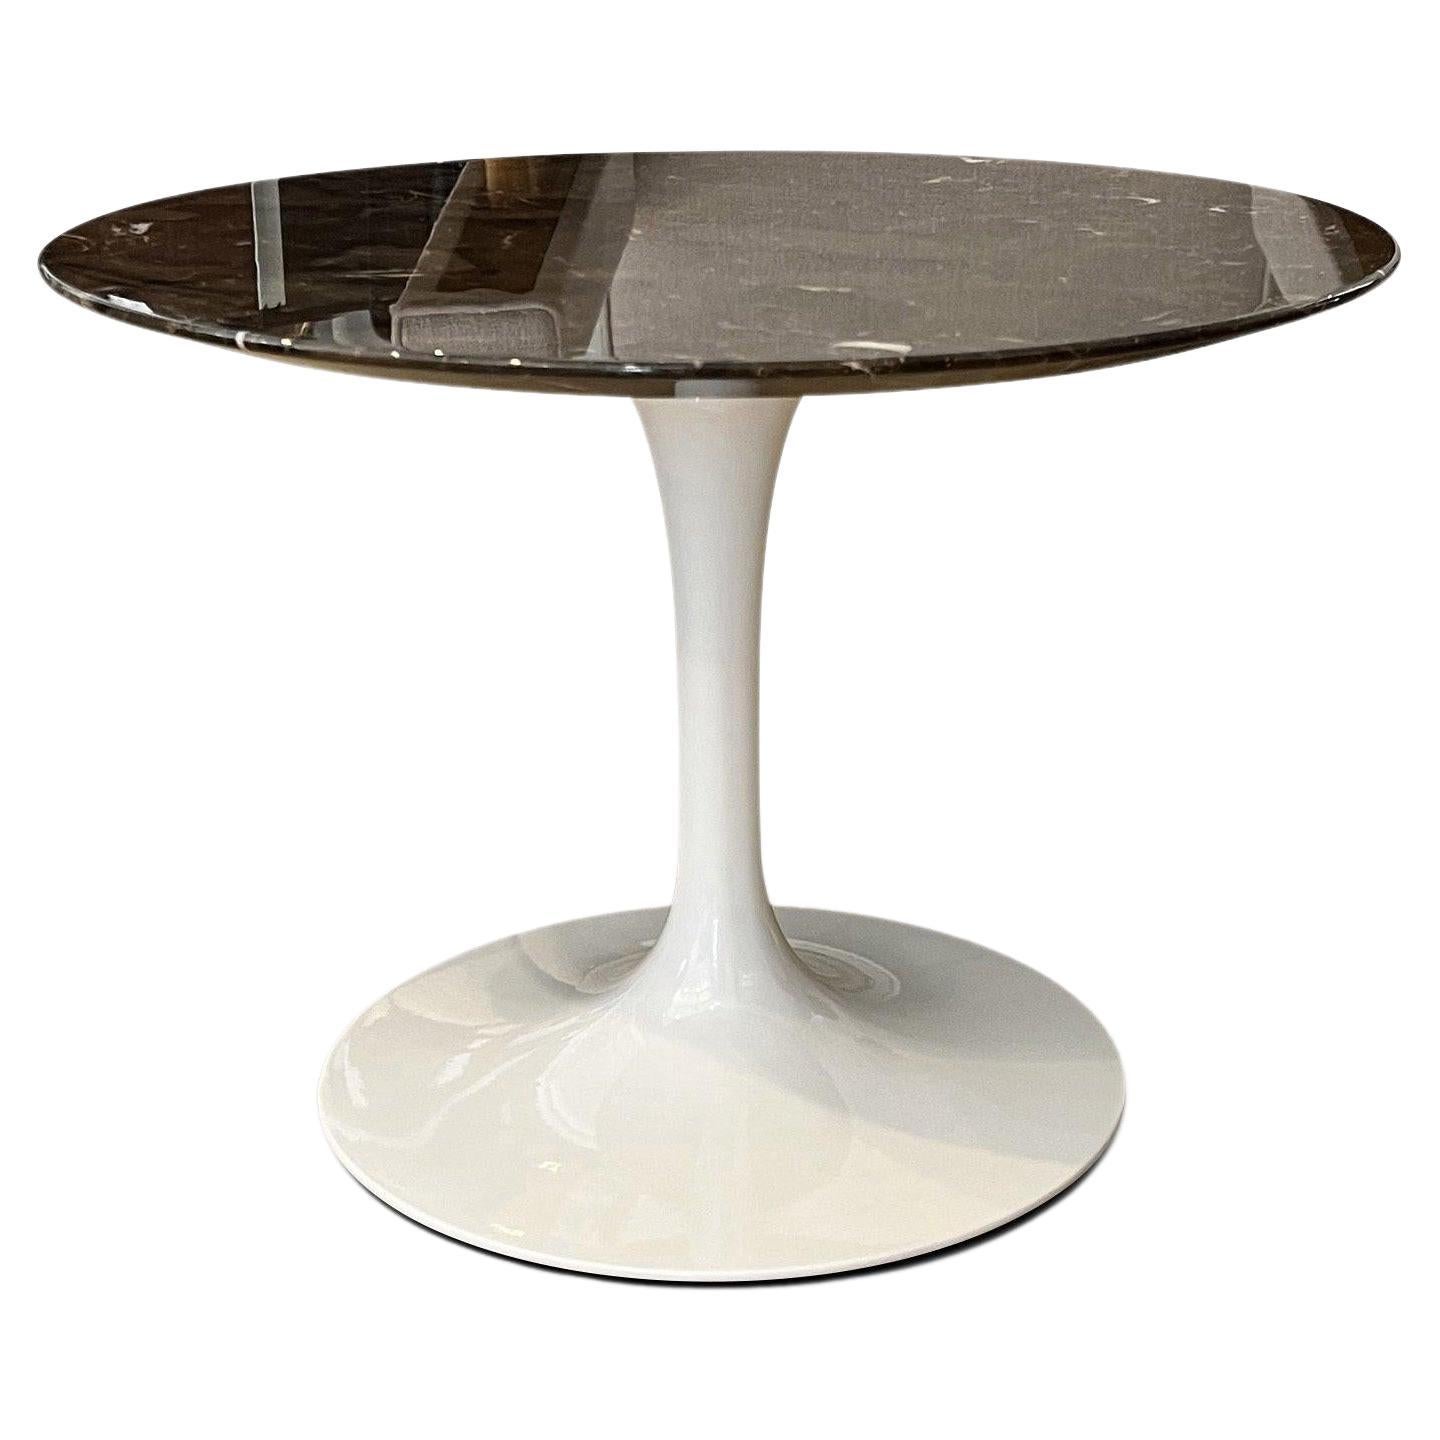 Eero Saarinen Small Round Coffee Table with Espresso Marble Top & White Base